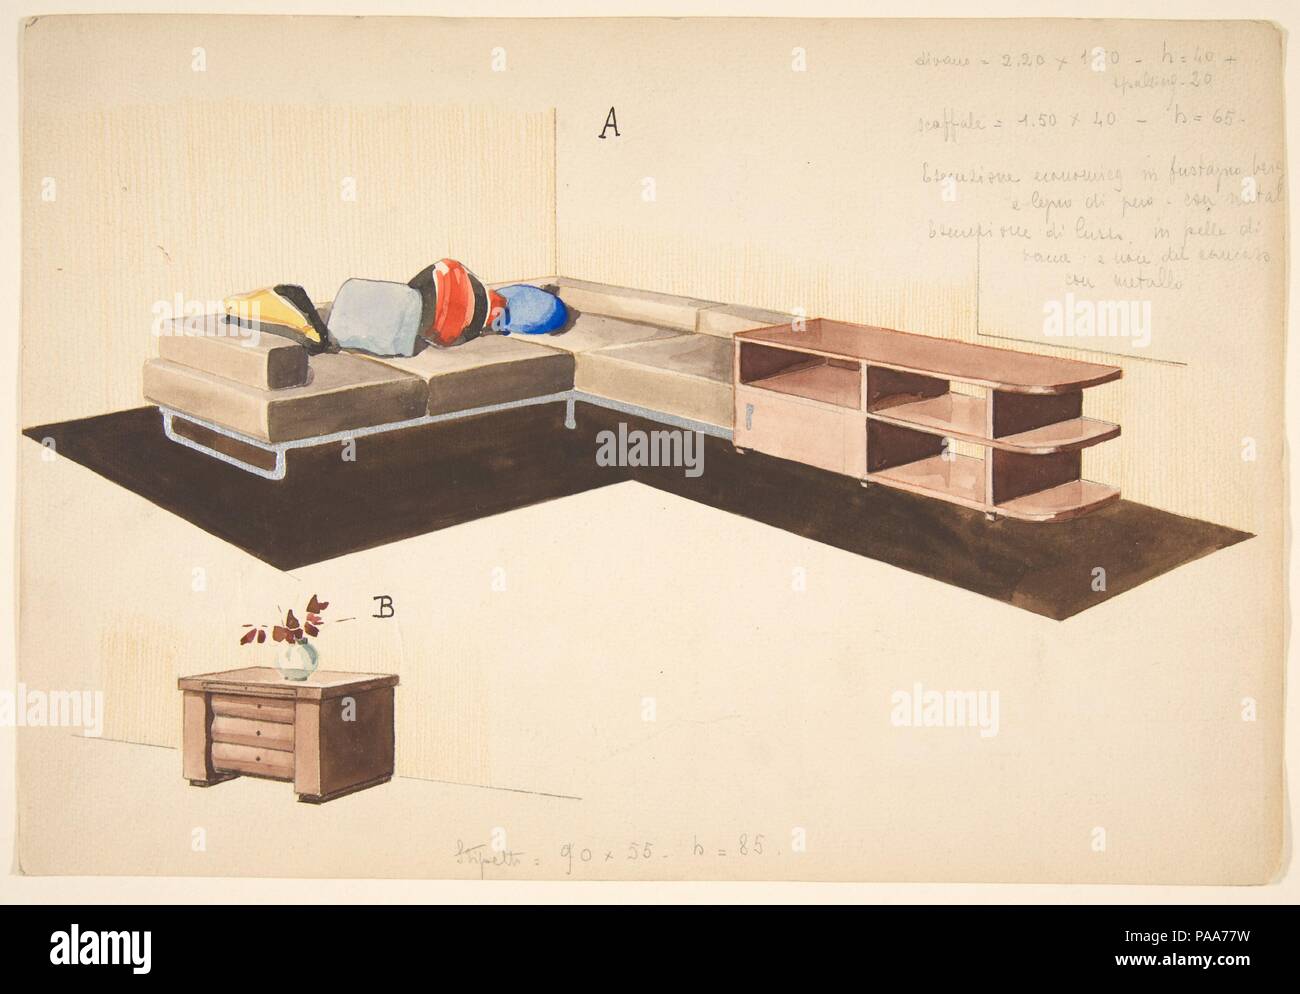 Divano, seoffale, e stipetto [Perspective of L-Shape Sofa and Storage Unit]. Artist: Guglielmo Ulrich (Italian, 1904-1977). Dimensions: Sheet: 11 1/8 × 7 9/16 in. (28.2 × 19.2 cm). Date: 1933.  Guglielmo Ulrich graduated from the Istituto Superiore Politechnico in 1927. Three years later, he co-founded the furniture company ARCA, short for Arredamento Casa (Home Furnishings) of which he was the designer. Ulrich's early designs are in an elegant and highly finished Art Deco style, which was very popular among the high society of Milan. Ulrich was praised for his ability to combine the functiona Stock Photo